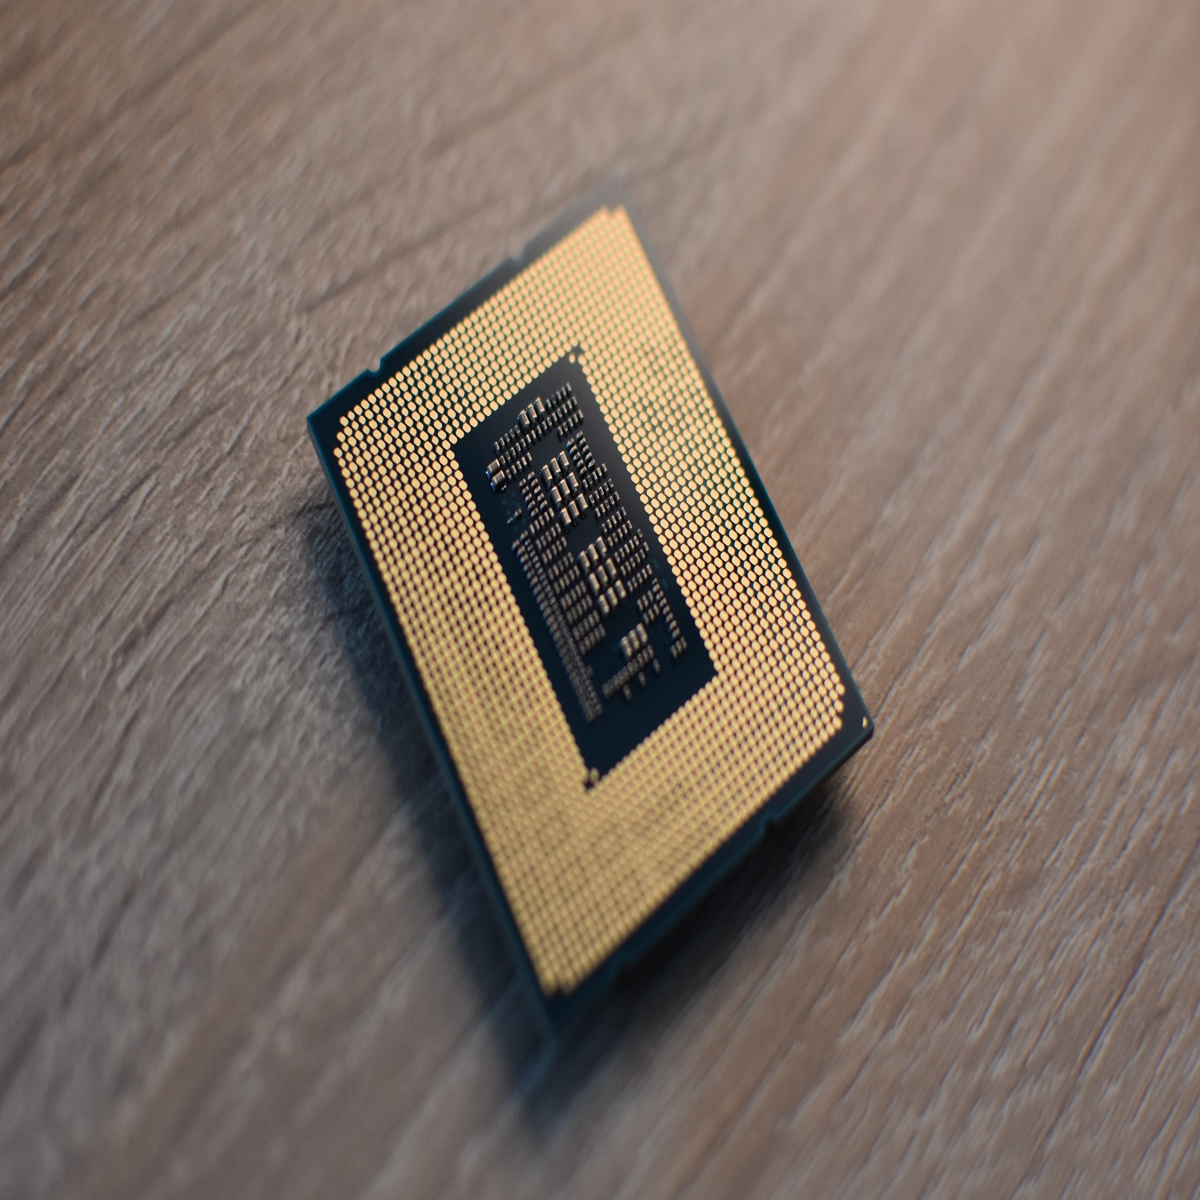 The new Intel Core i5-12600K CPU is already up to £45 off for